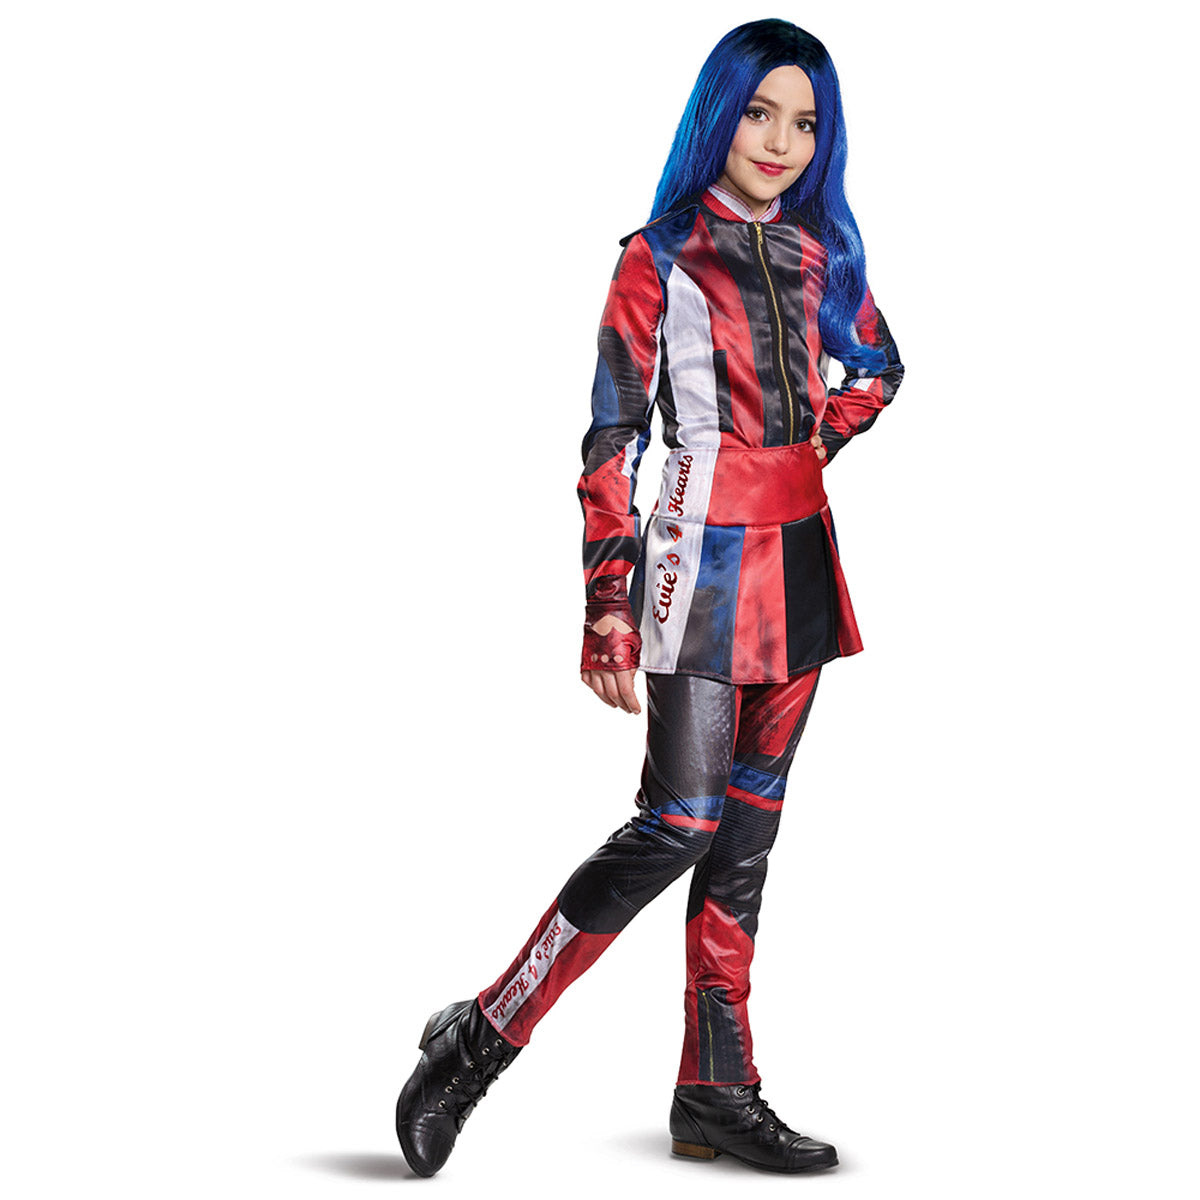 EVIE DELUXE Disguise 20357